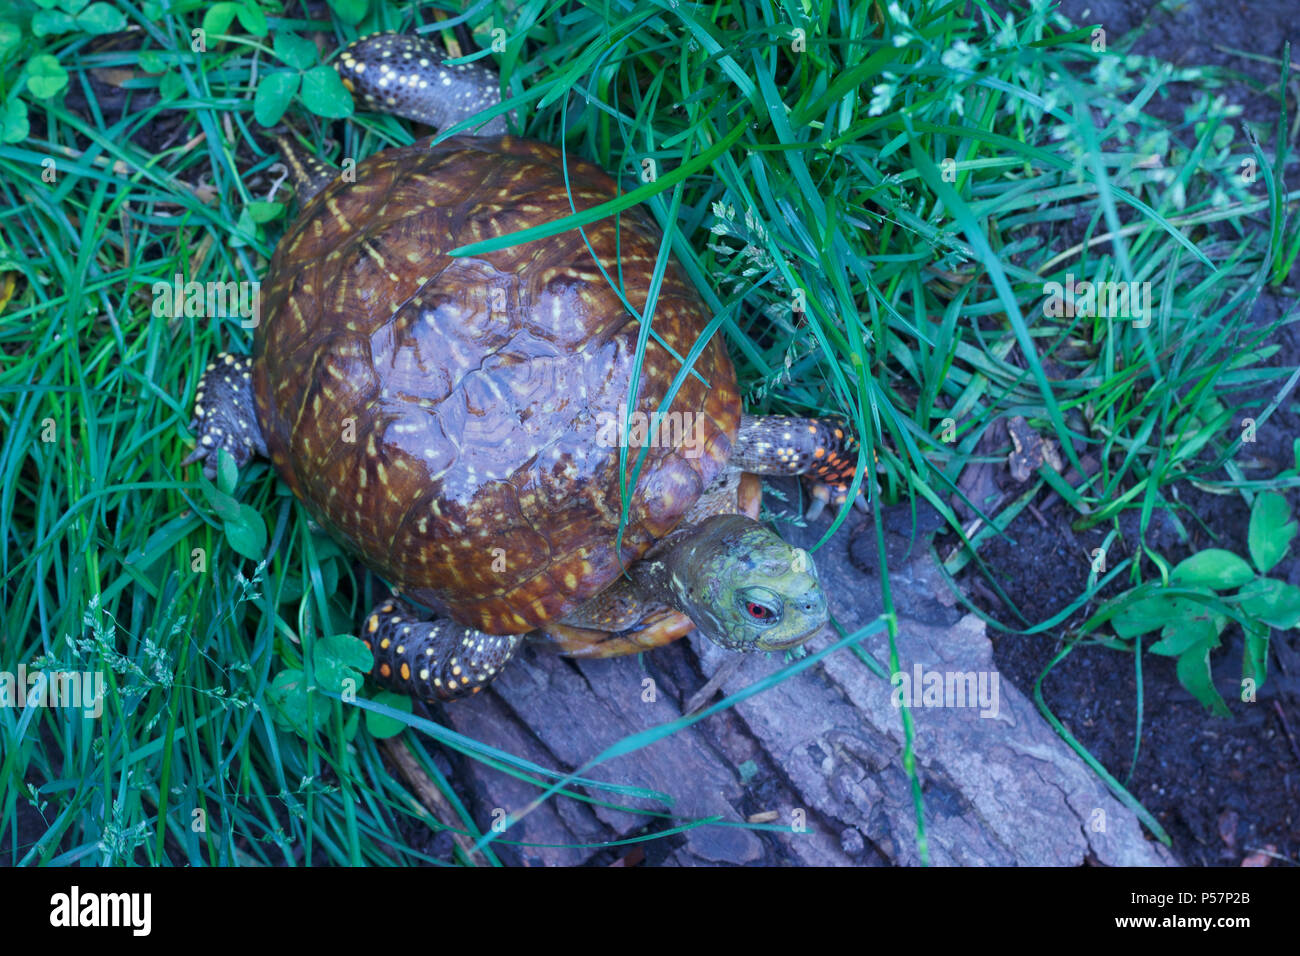 Close up view of a male western ornate box turtle with red eyes and colorful shell in a protected home environment habitat Stock Photo